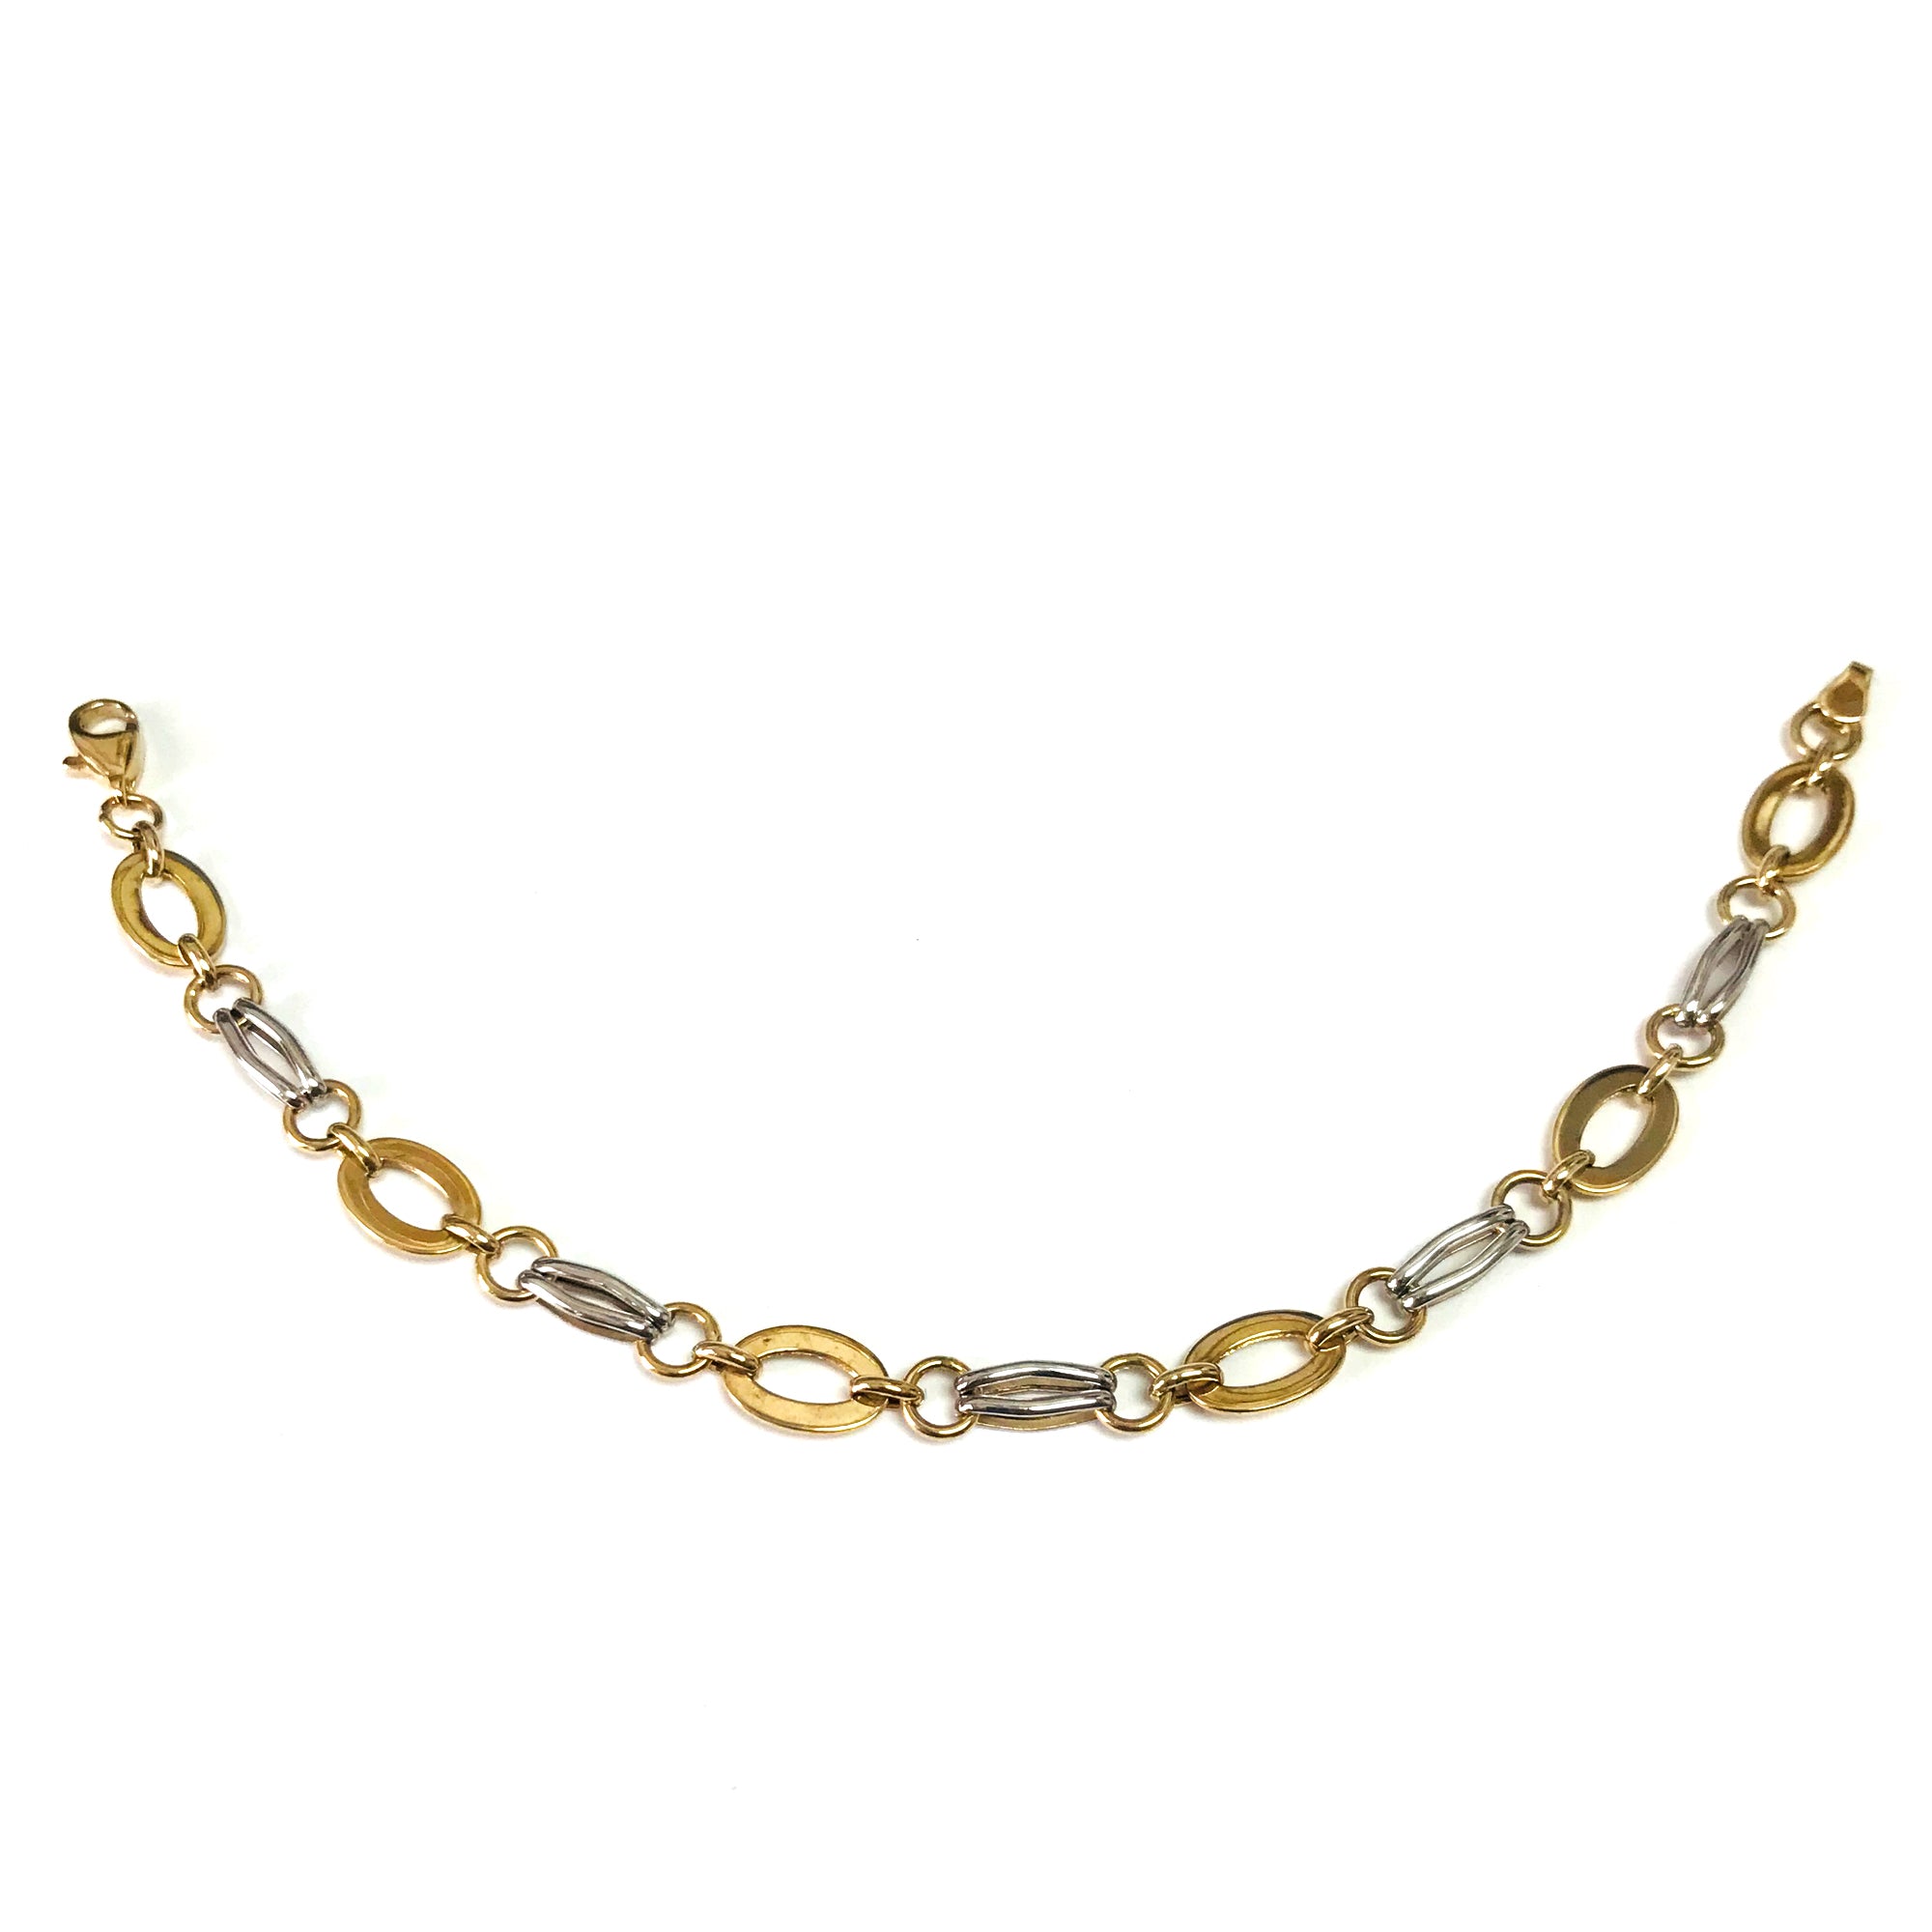 14k Yellow And White Gold Oval Links Bracelet, 7,25"